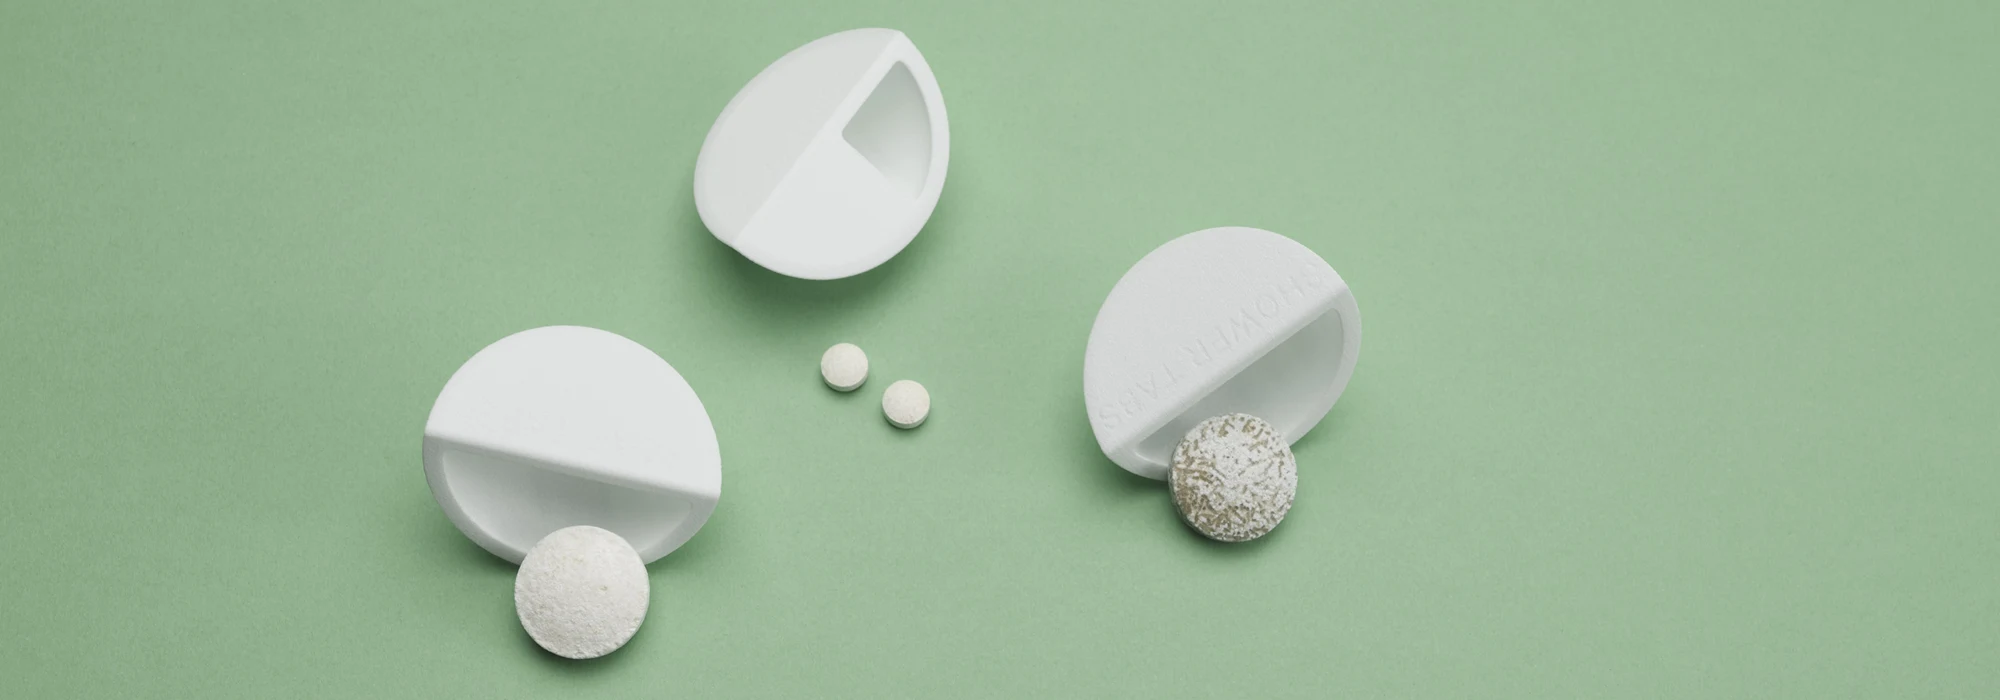 White wood-based packaging with dissolvable tablets on green background